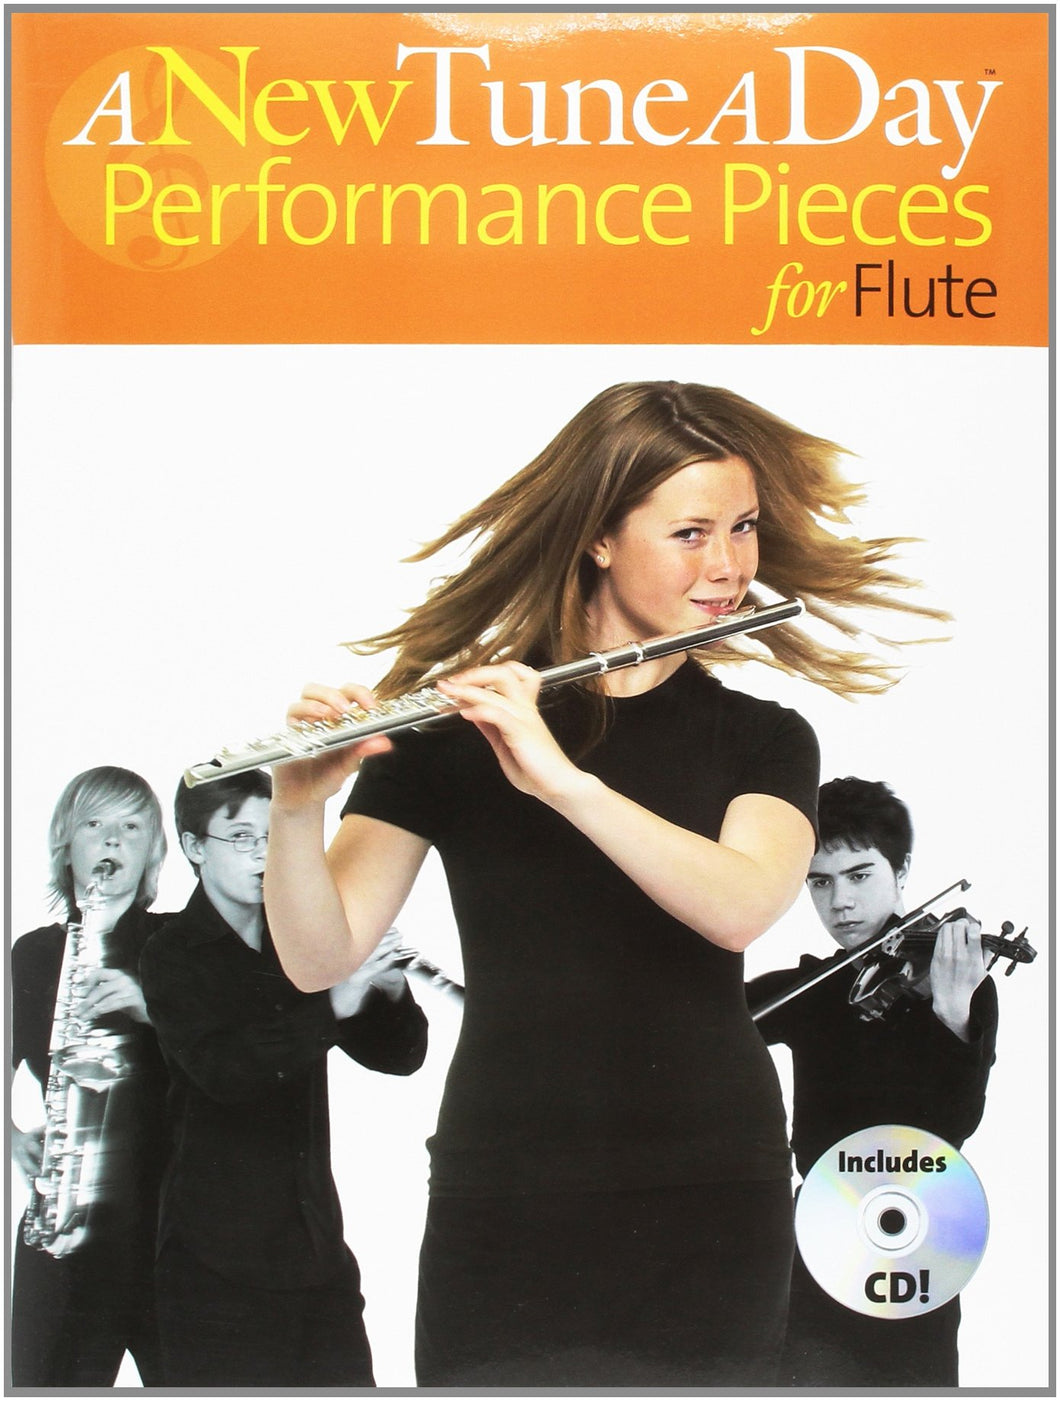 A New Tune A Day: Performance Pieces for Flute